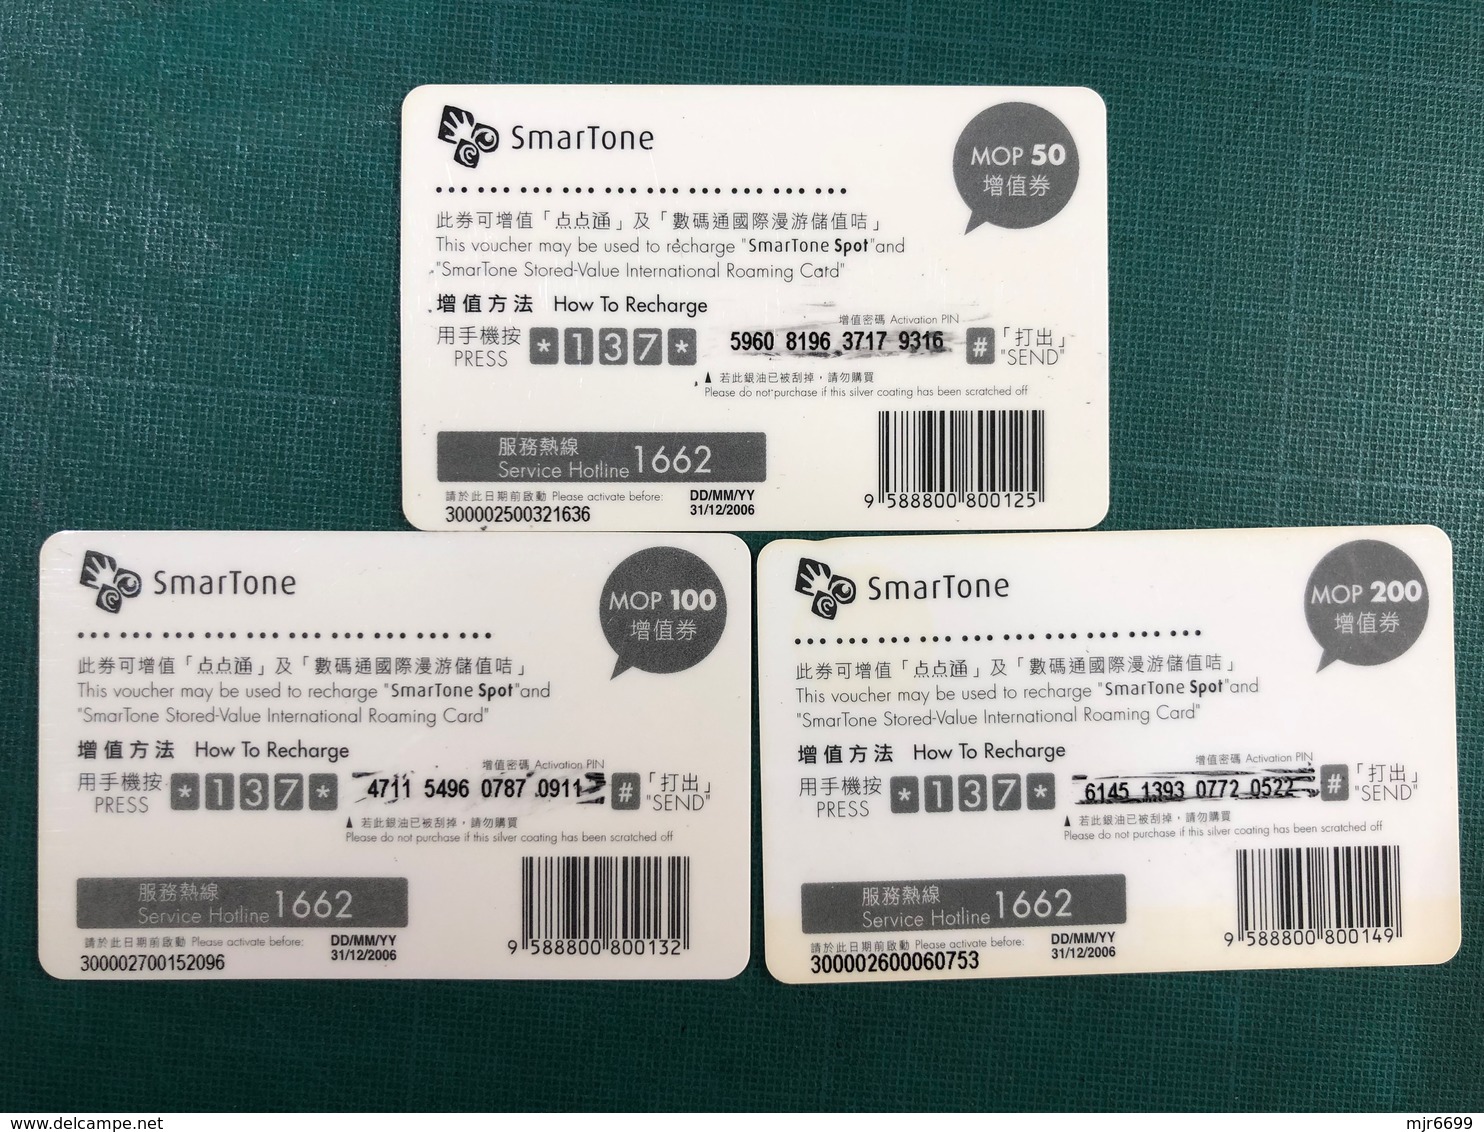 MACAU - SMARTONE RECHARGE VOUCHER CARD WITH 3 DIFFERENT VALUE - Macao